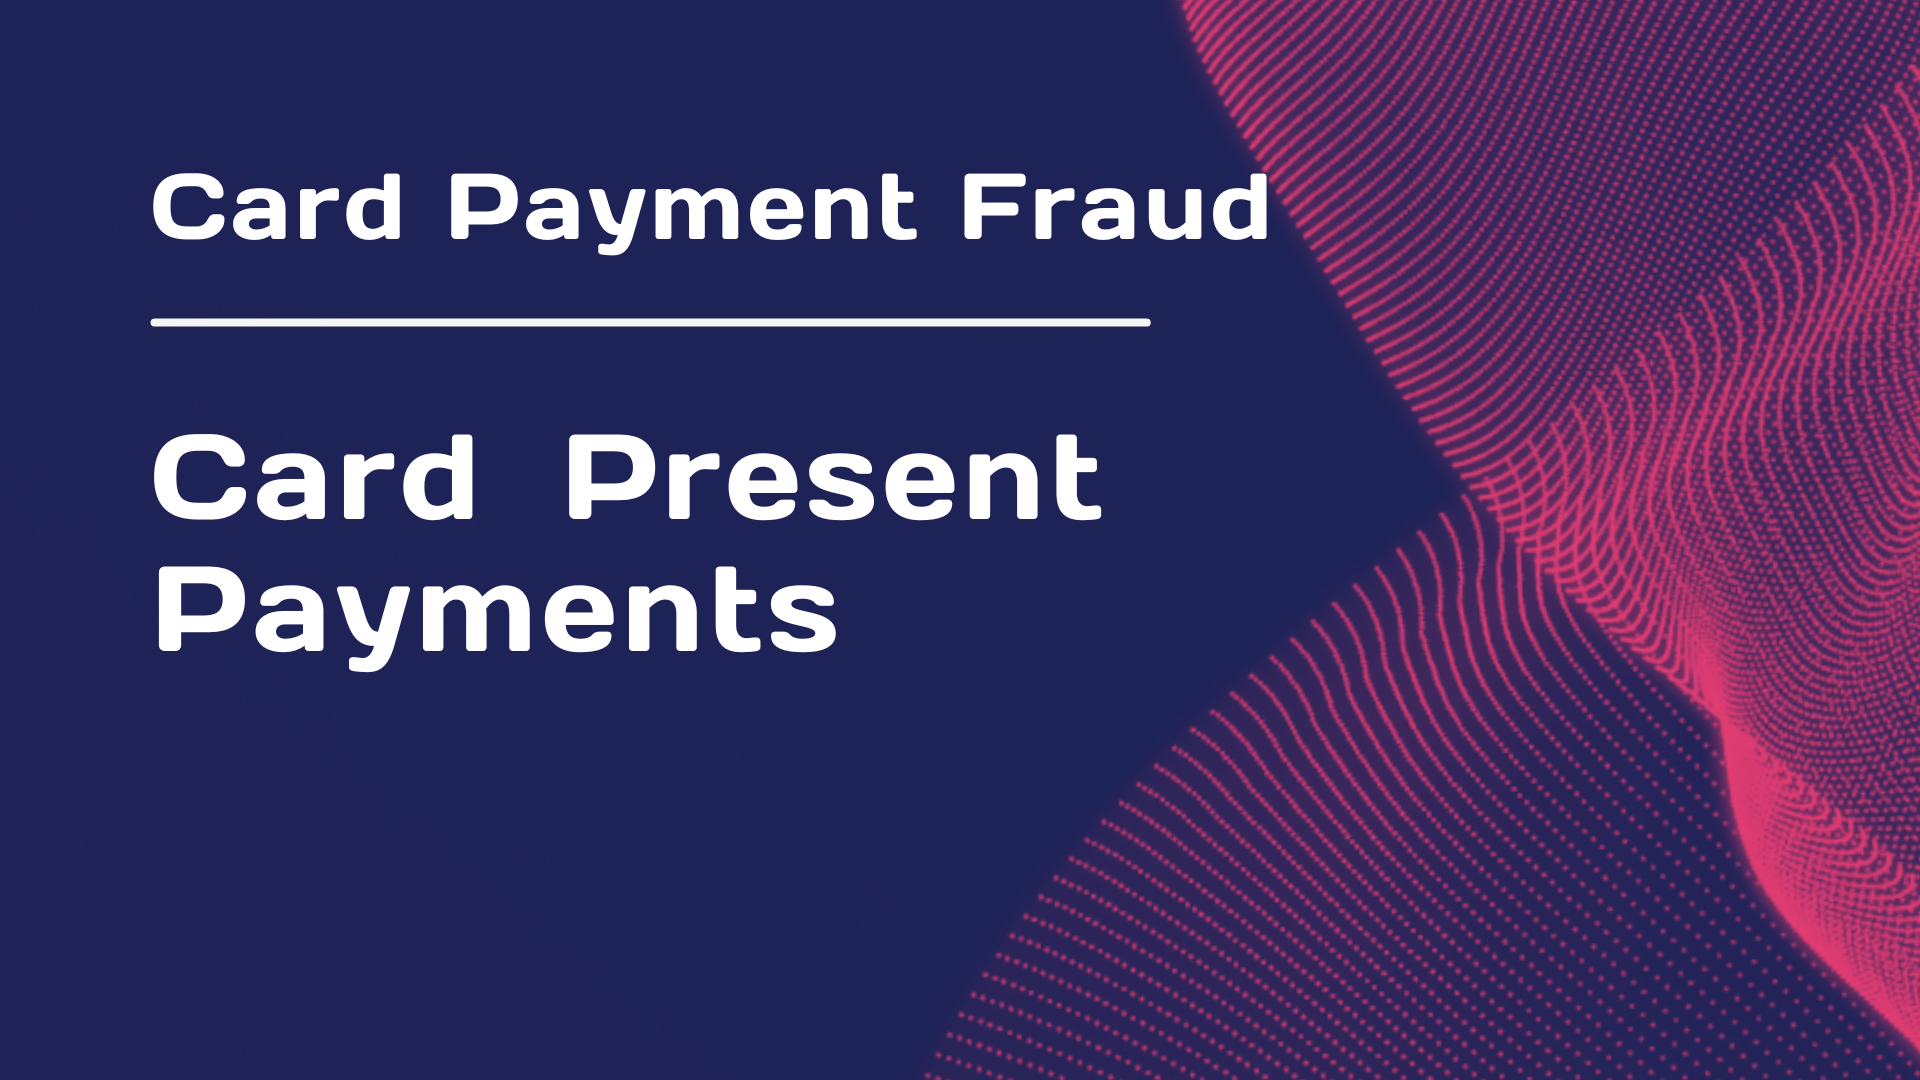 Card Payment Fraud - Module 1 : Card Present Payments